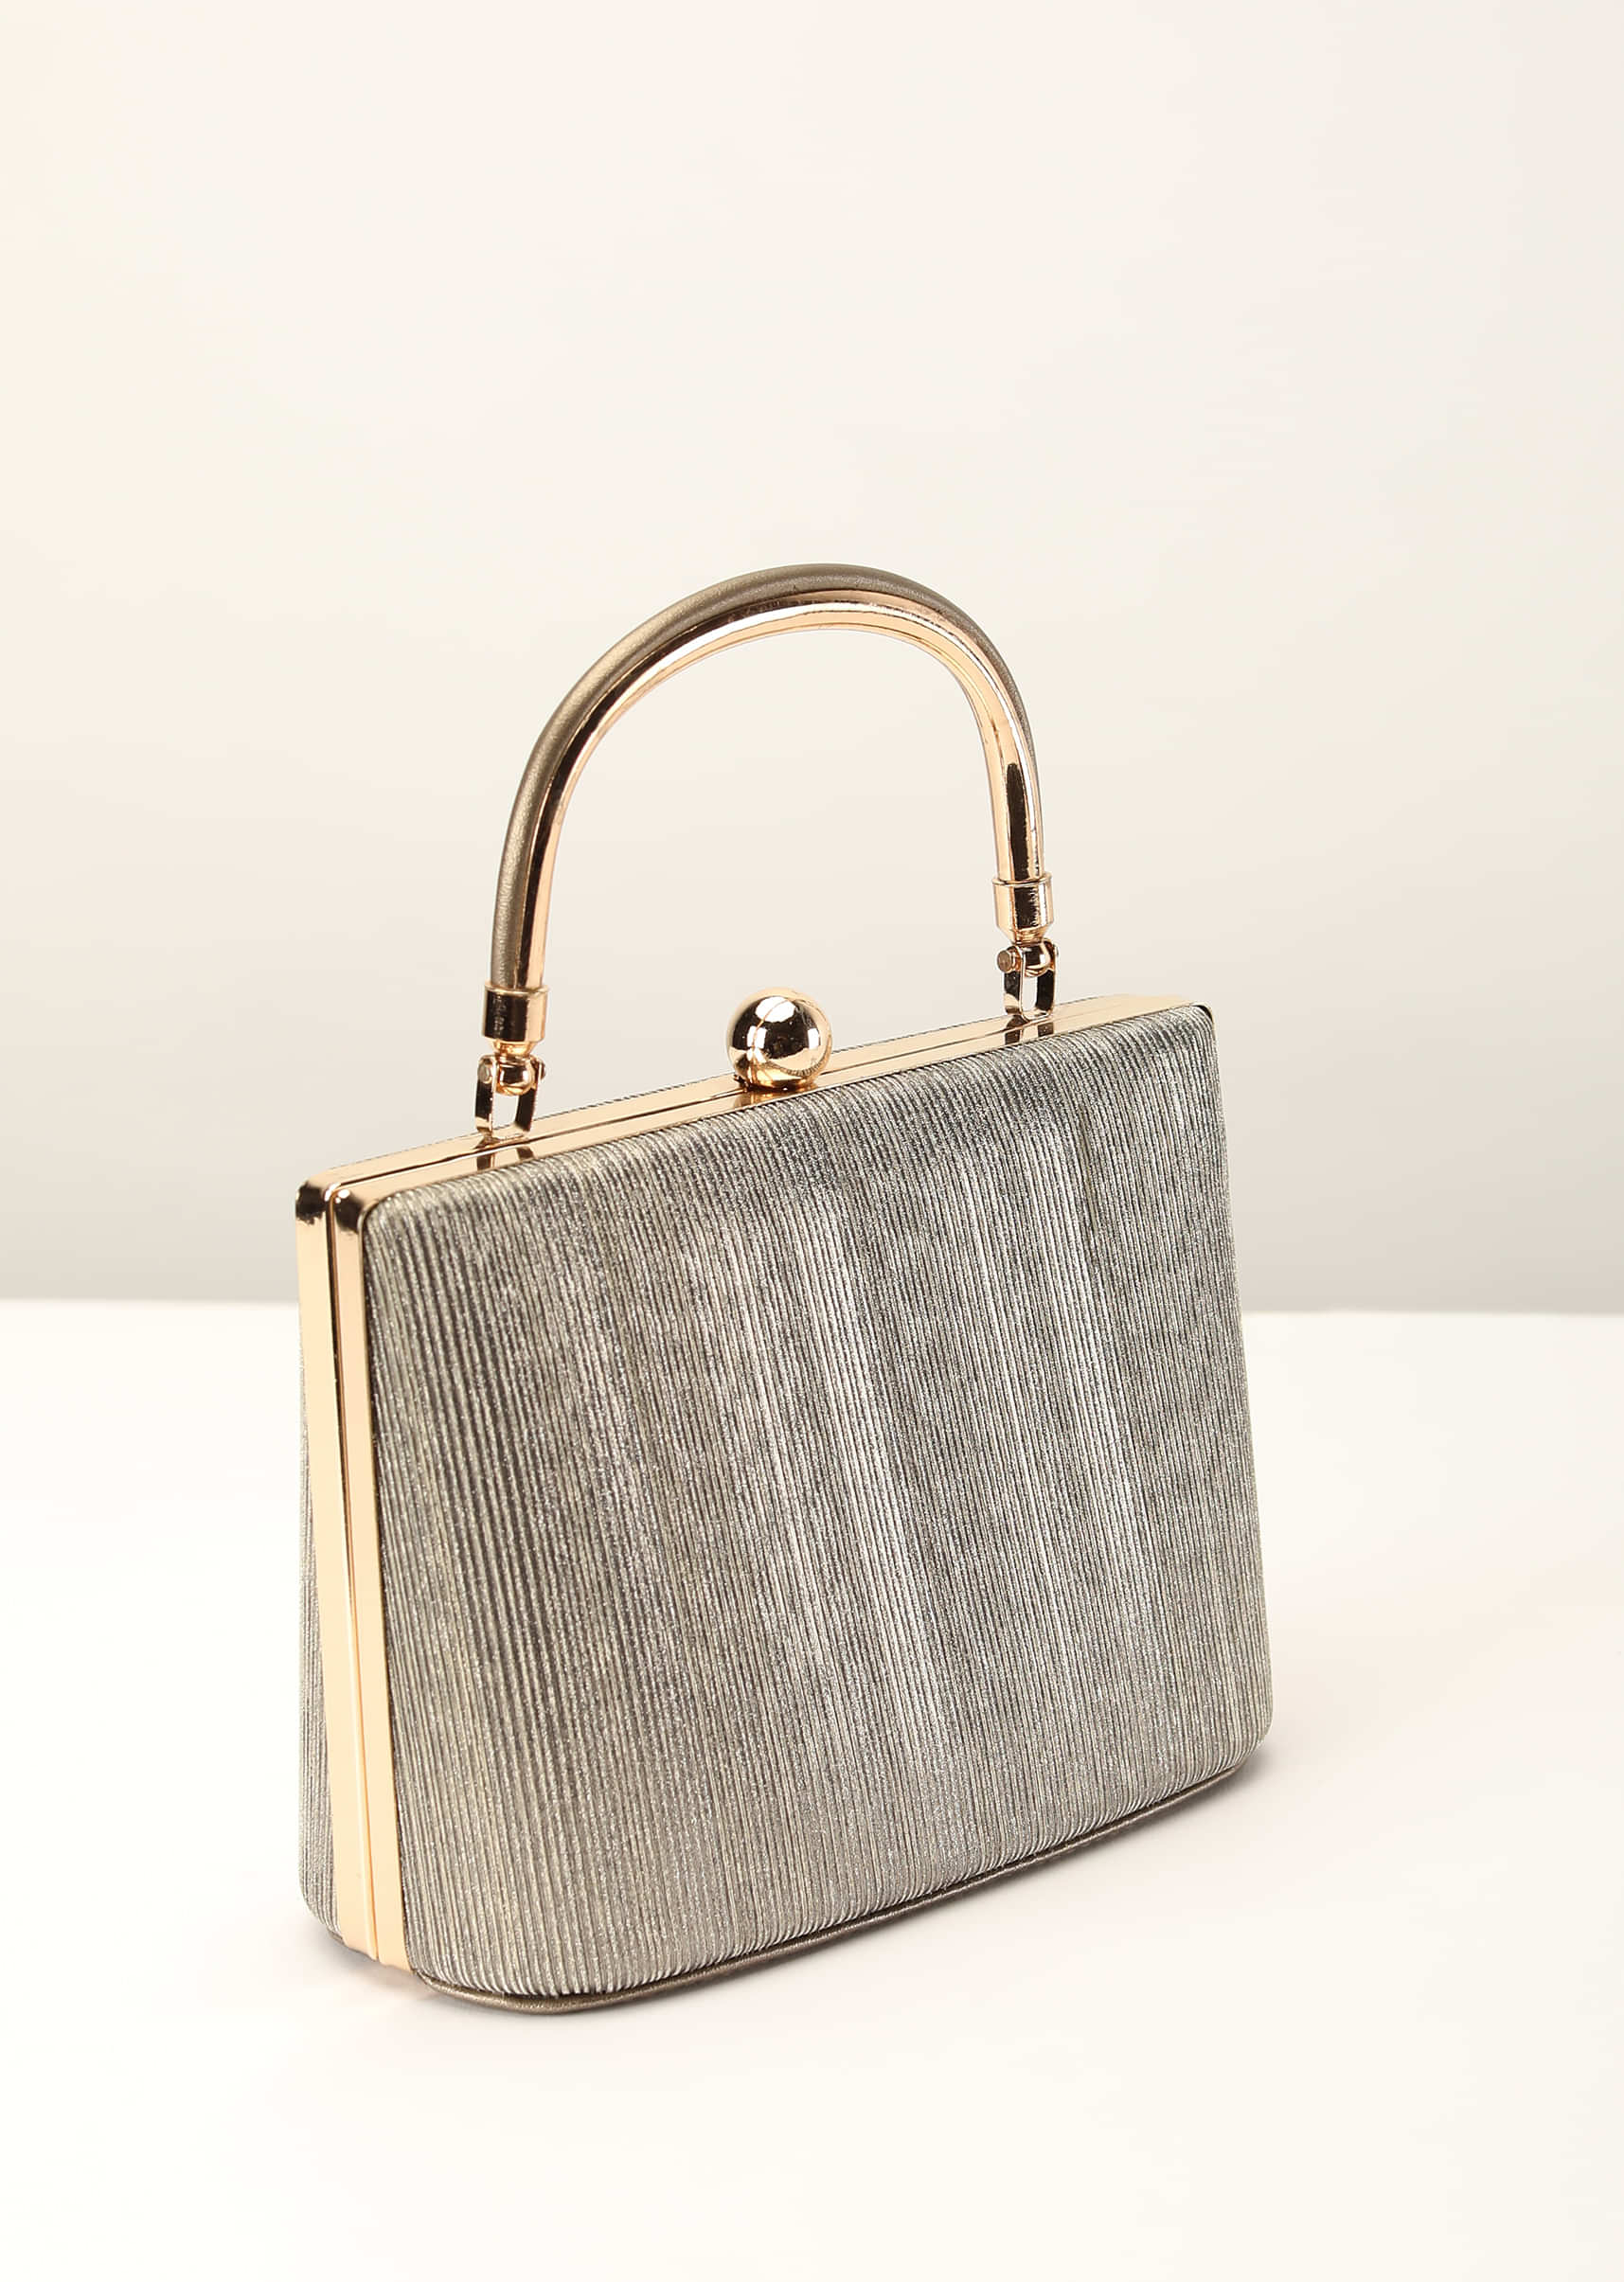 Silver Gold Clutch In Crush Fabric With Metal Handle And Clasp Closure